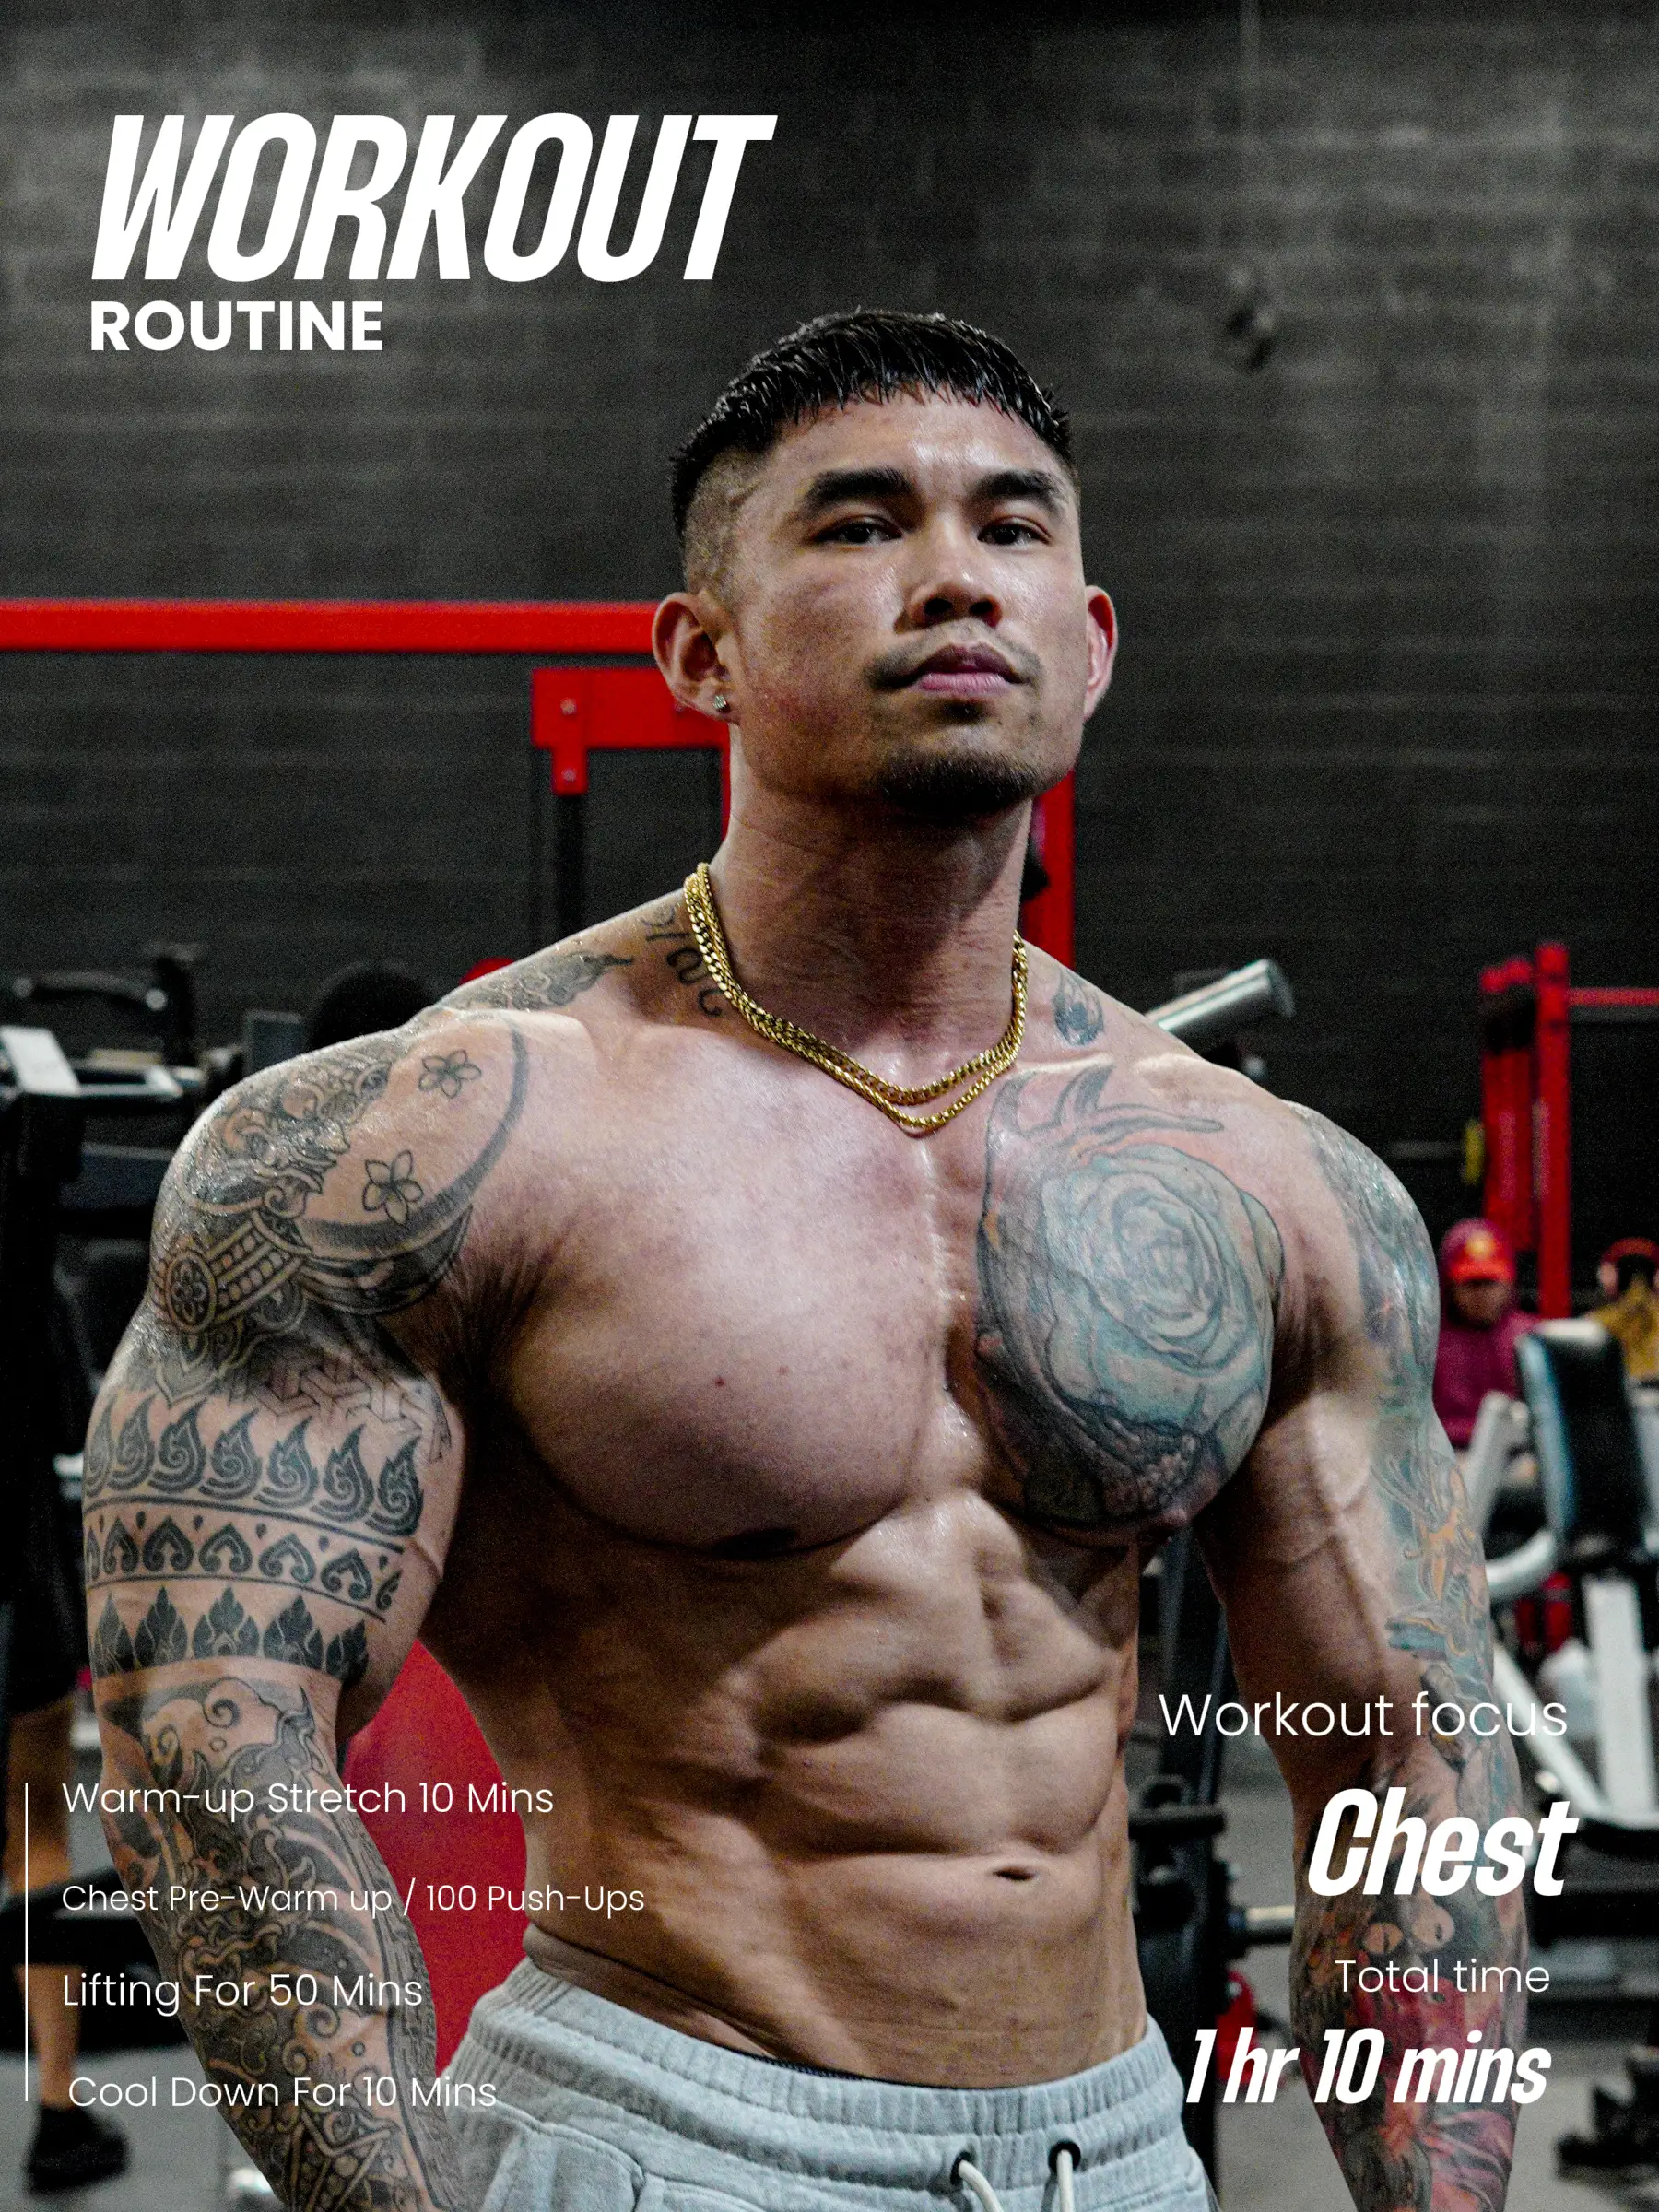 Best CHEST Workout For a Bigger Chest! (Full Workout & Top tips)   Struggling to build your chest? Save this workout & try these tips💪🏼  Ready to start your 12 week transformation?